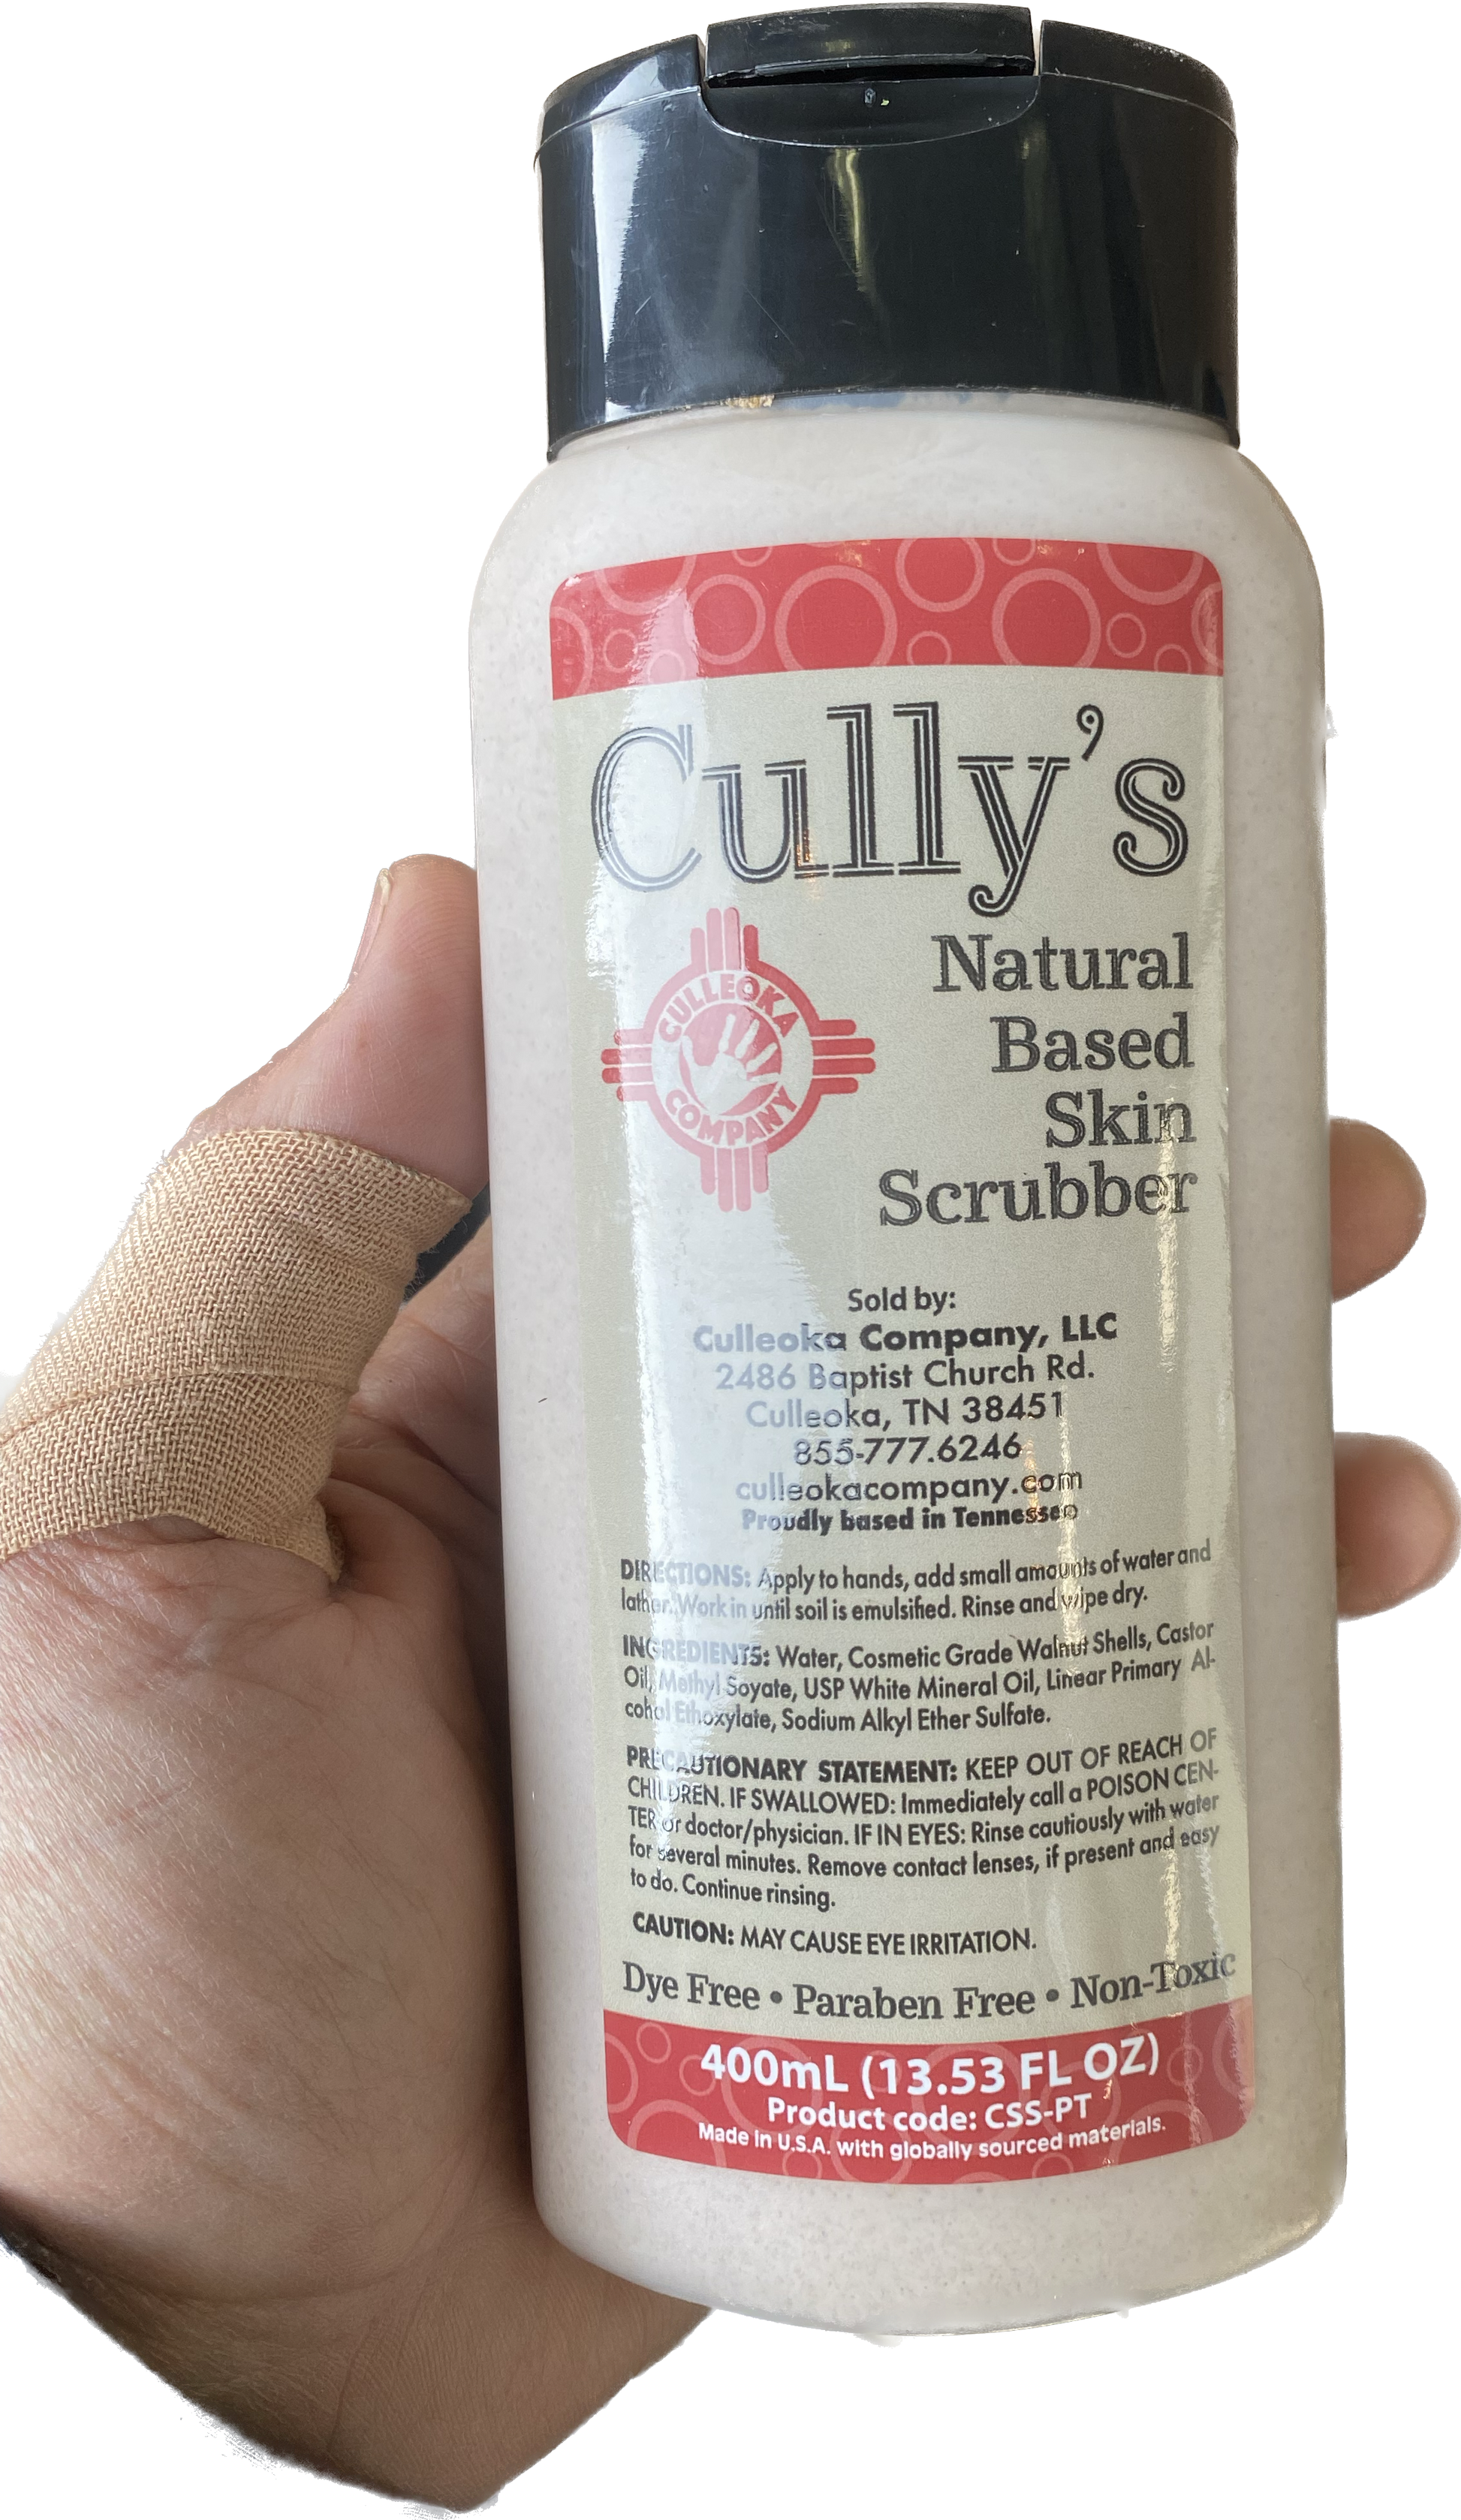 Cully's Skin Scrubber is natural based soap